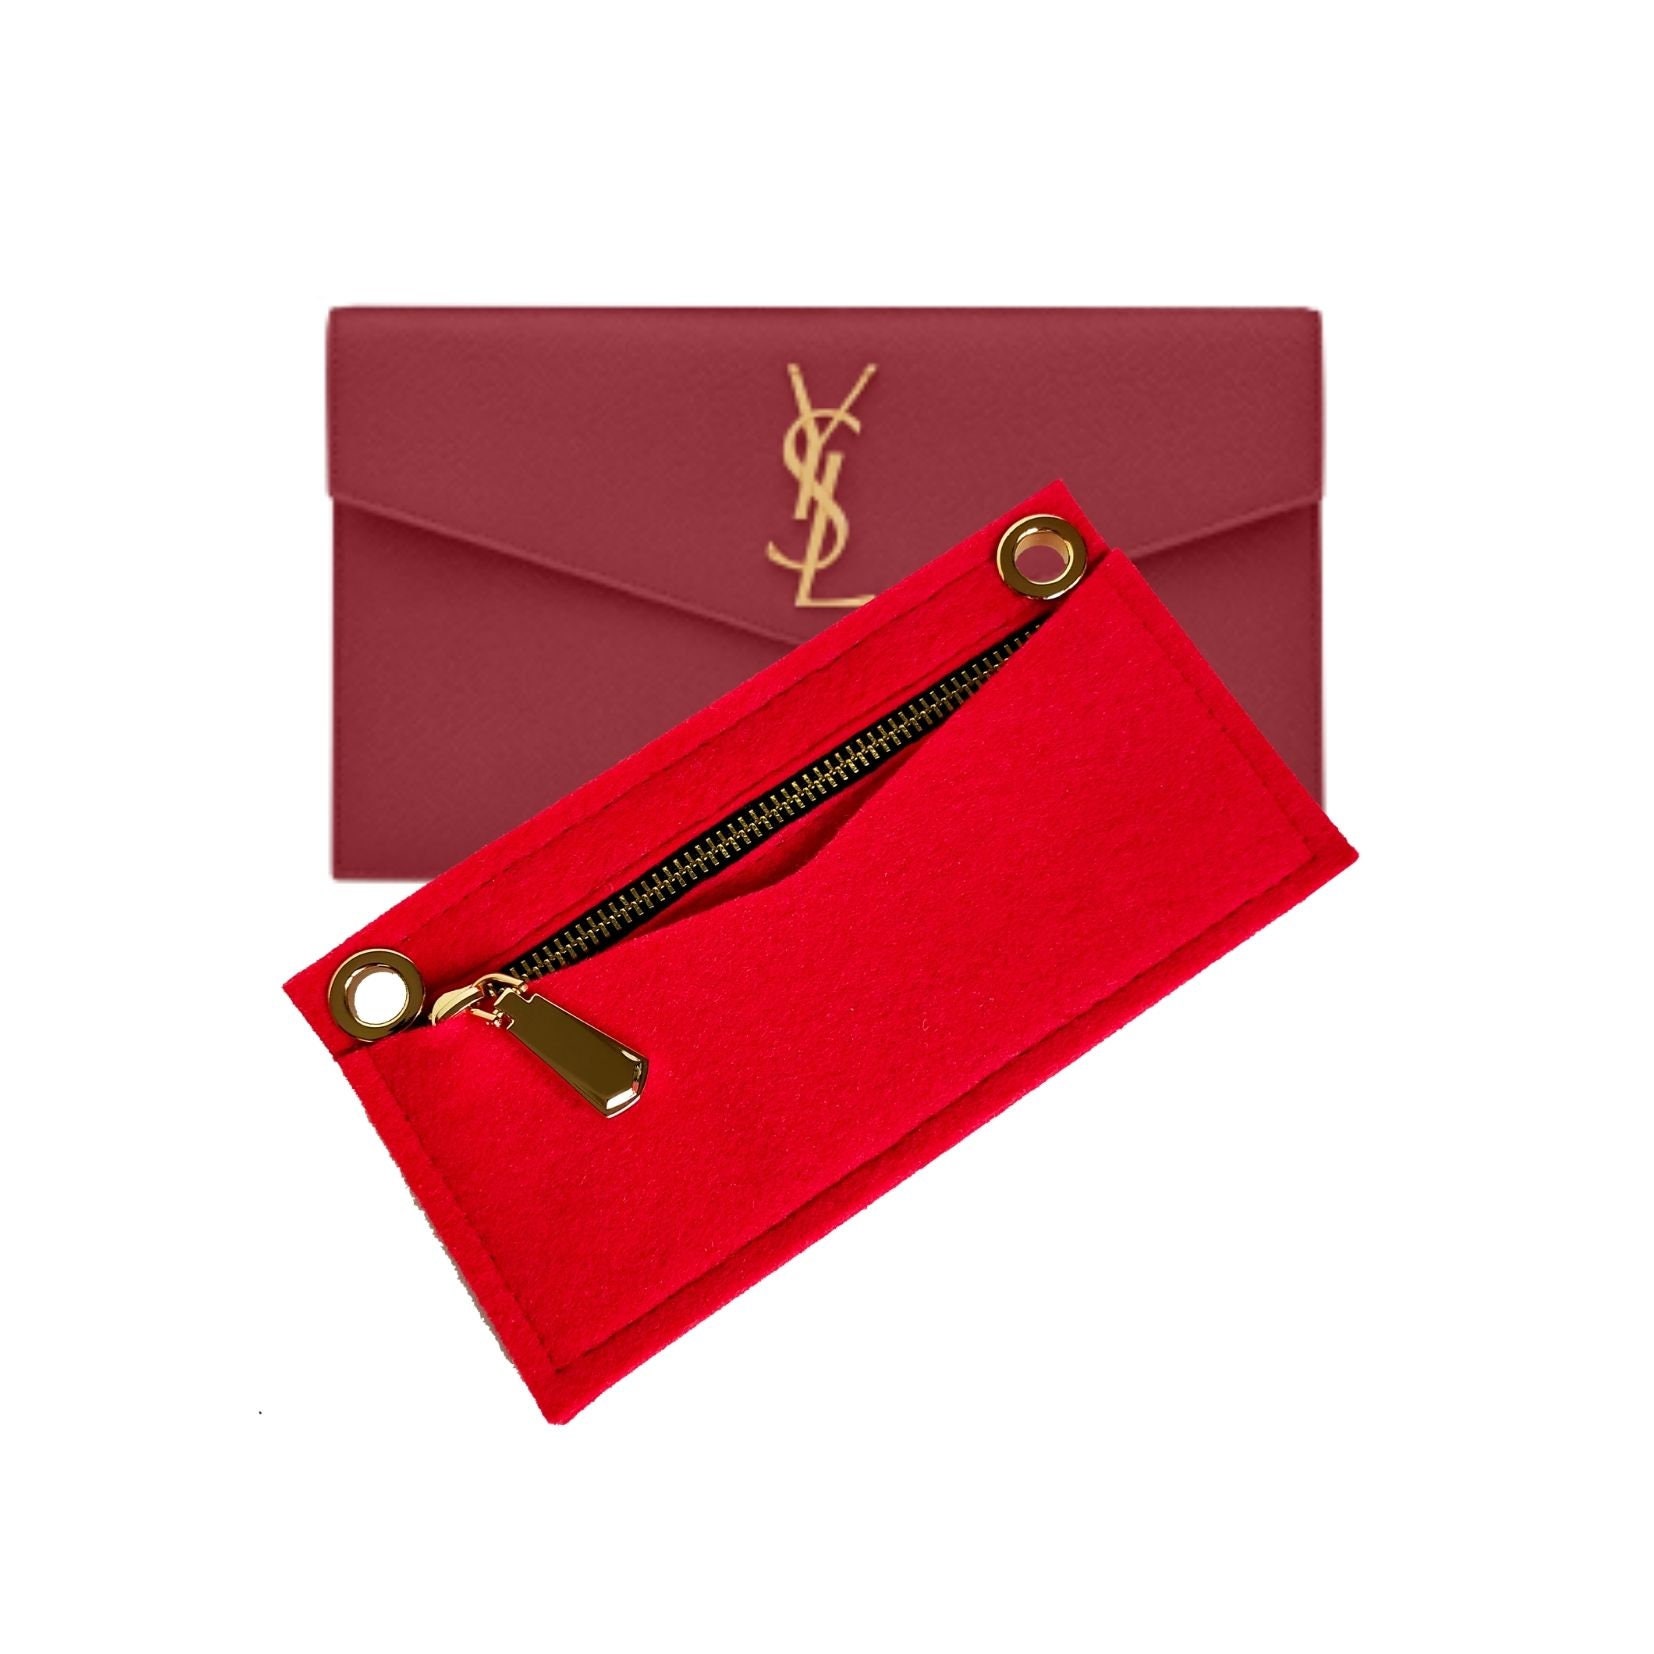  Uptown Clutch Conversion Kit with Gold Chain Wristlet